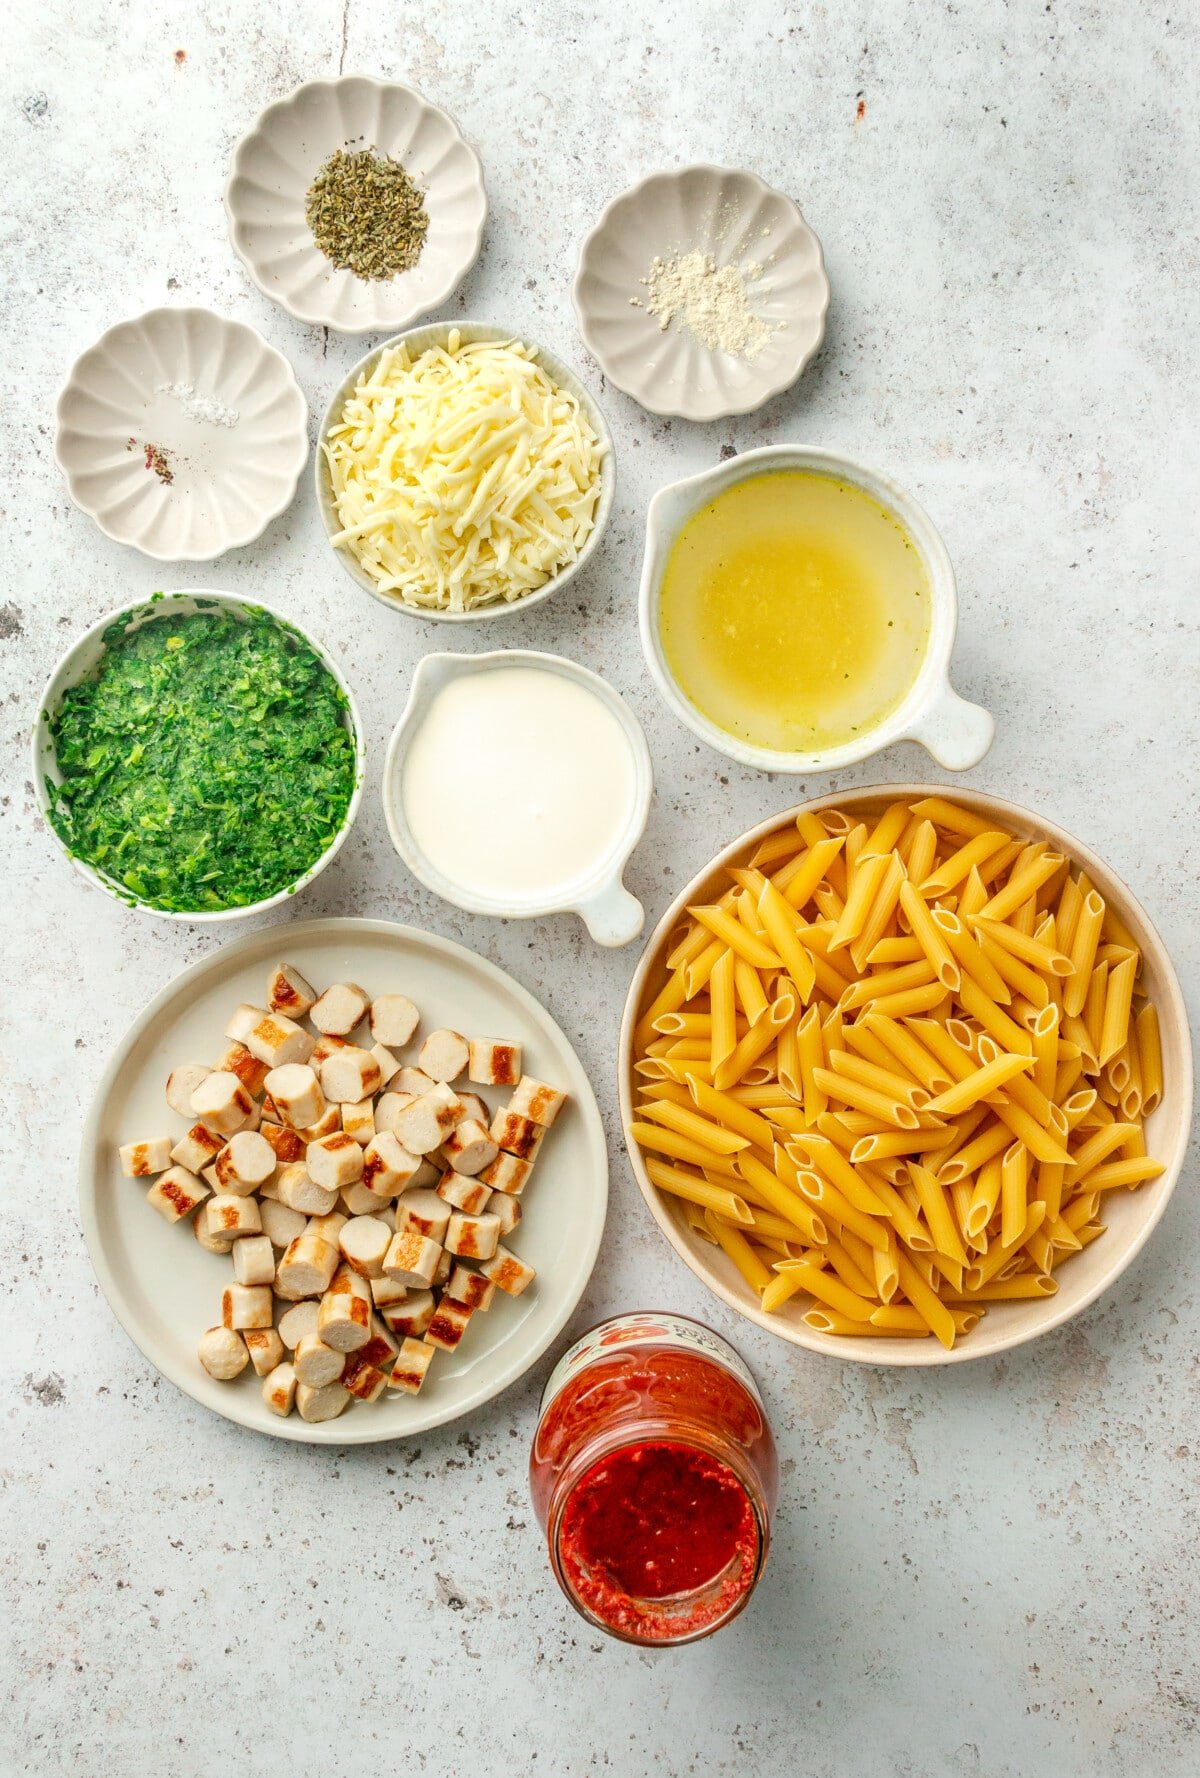 Ingredients for easy no boil pasta bake are laid out in a variety of small plates and bowls on a light grey colored surface.